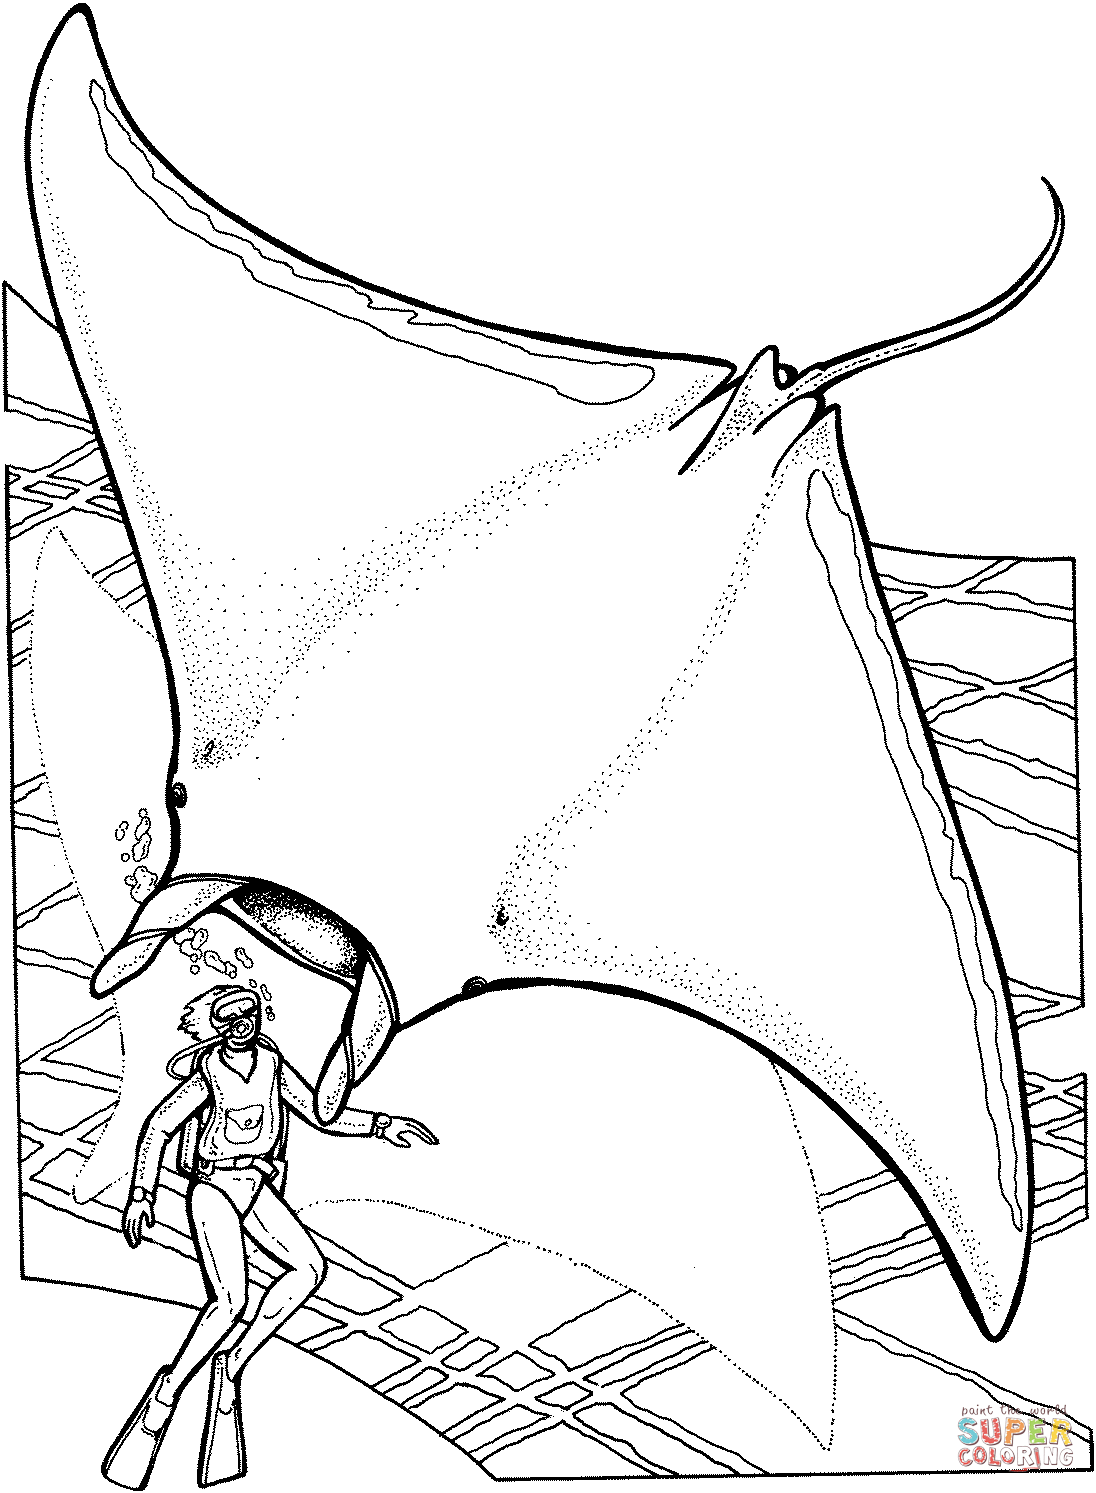 Ray coloring pages | Free Coloring Pages